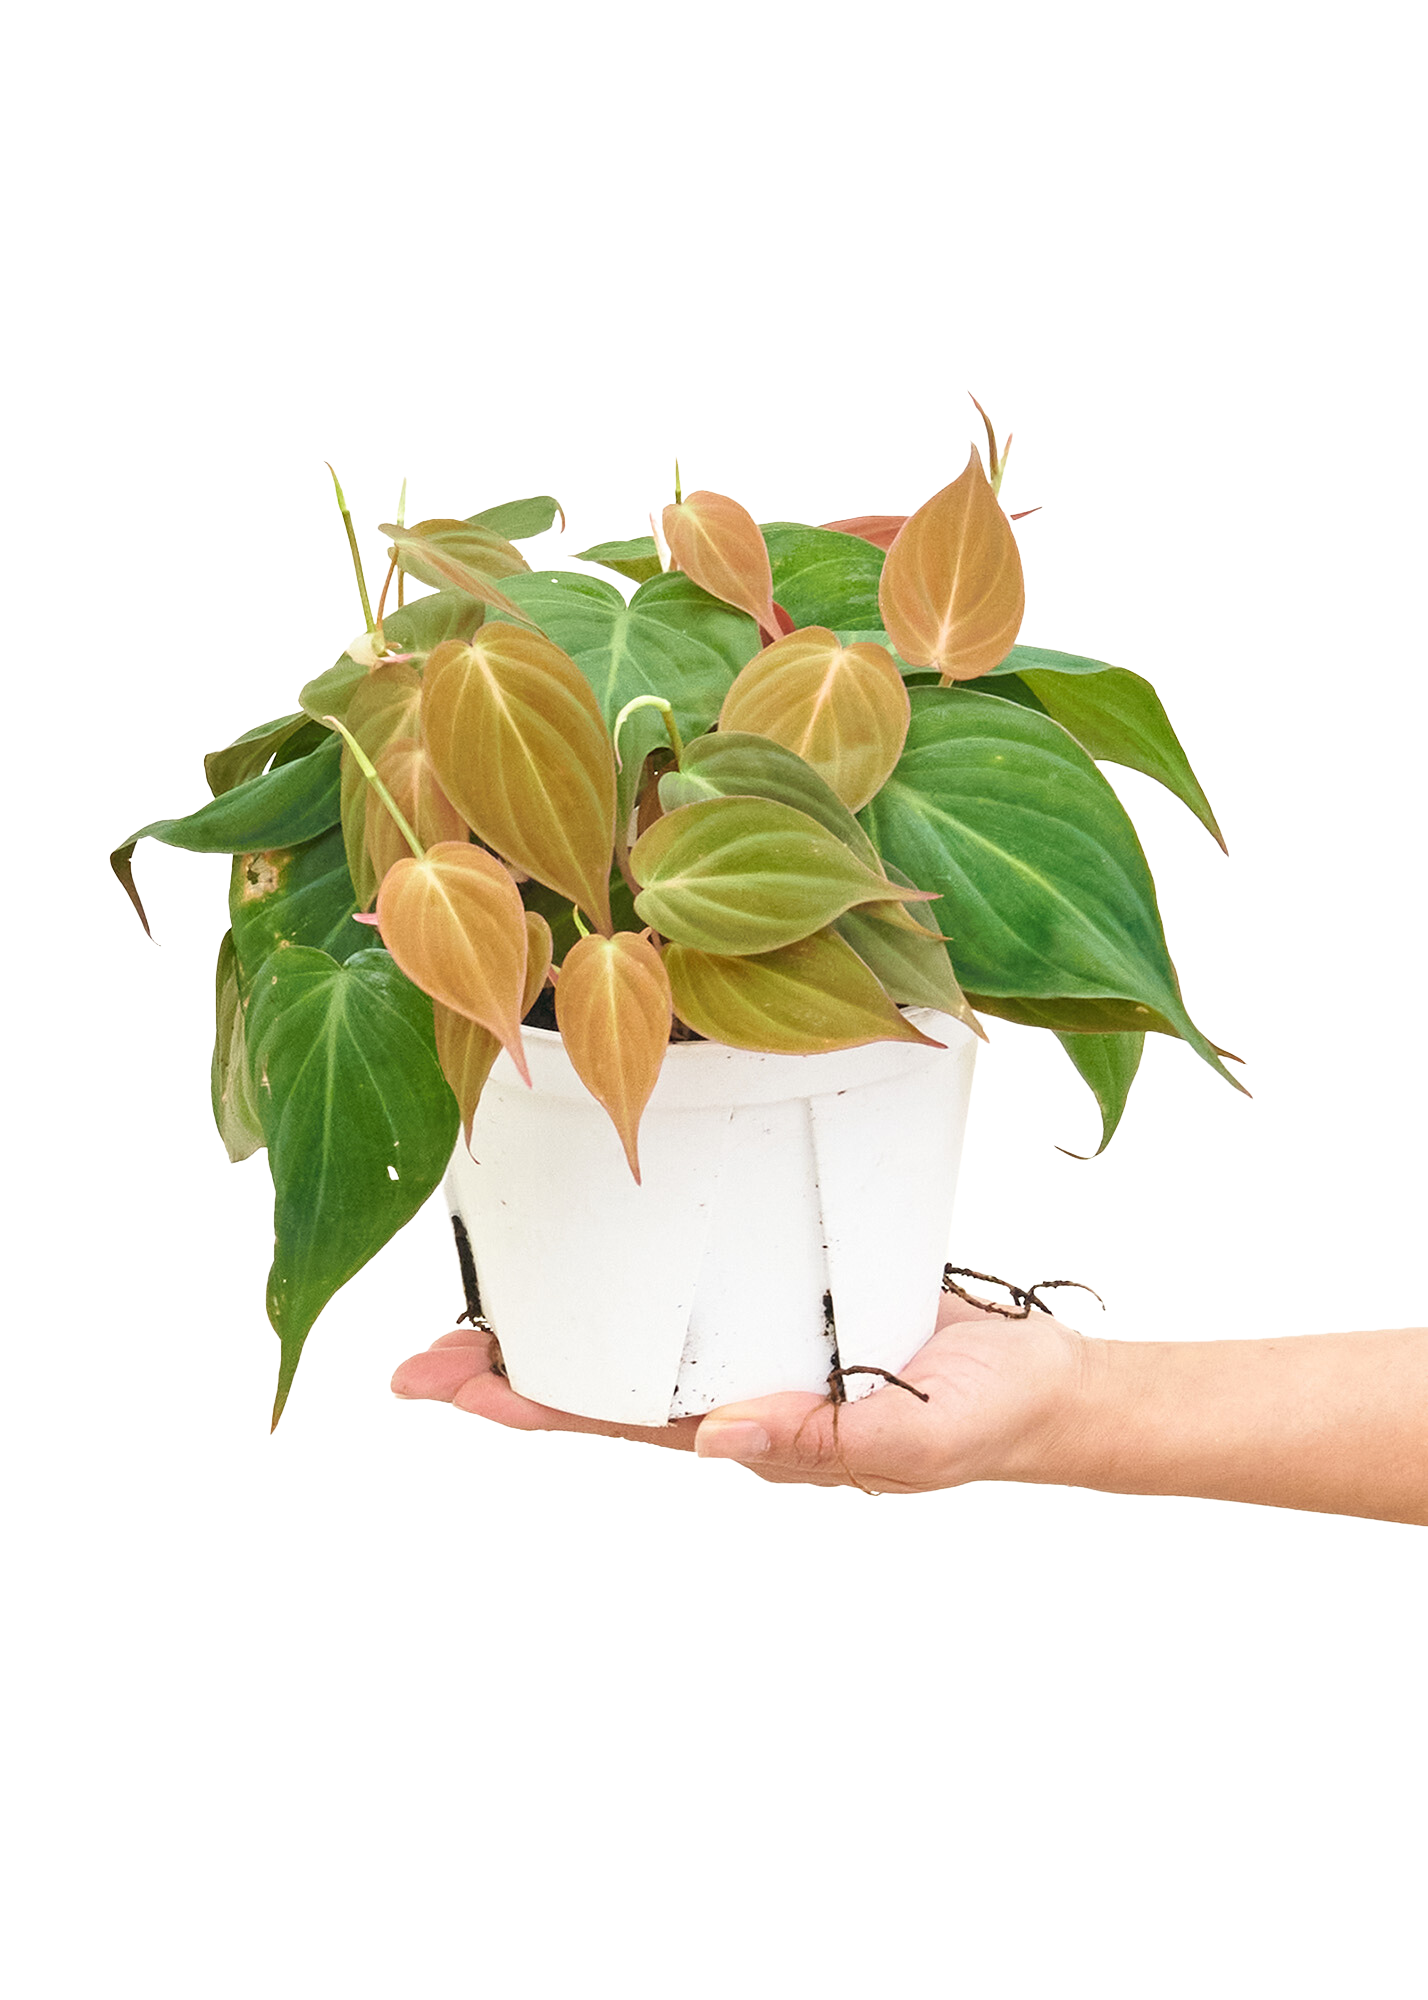 Medium size Velvet Leaf Philodendron Plant in a growers pot with a white background with a hand holding the bottom of the pot at a slight angle